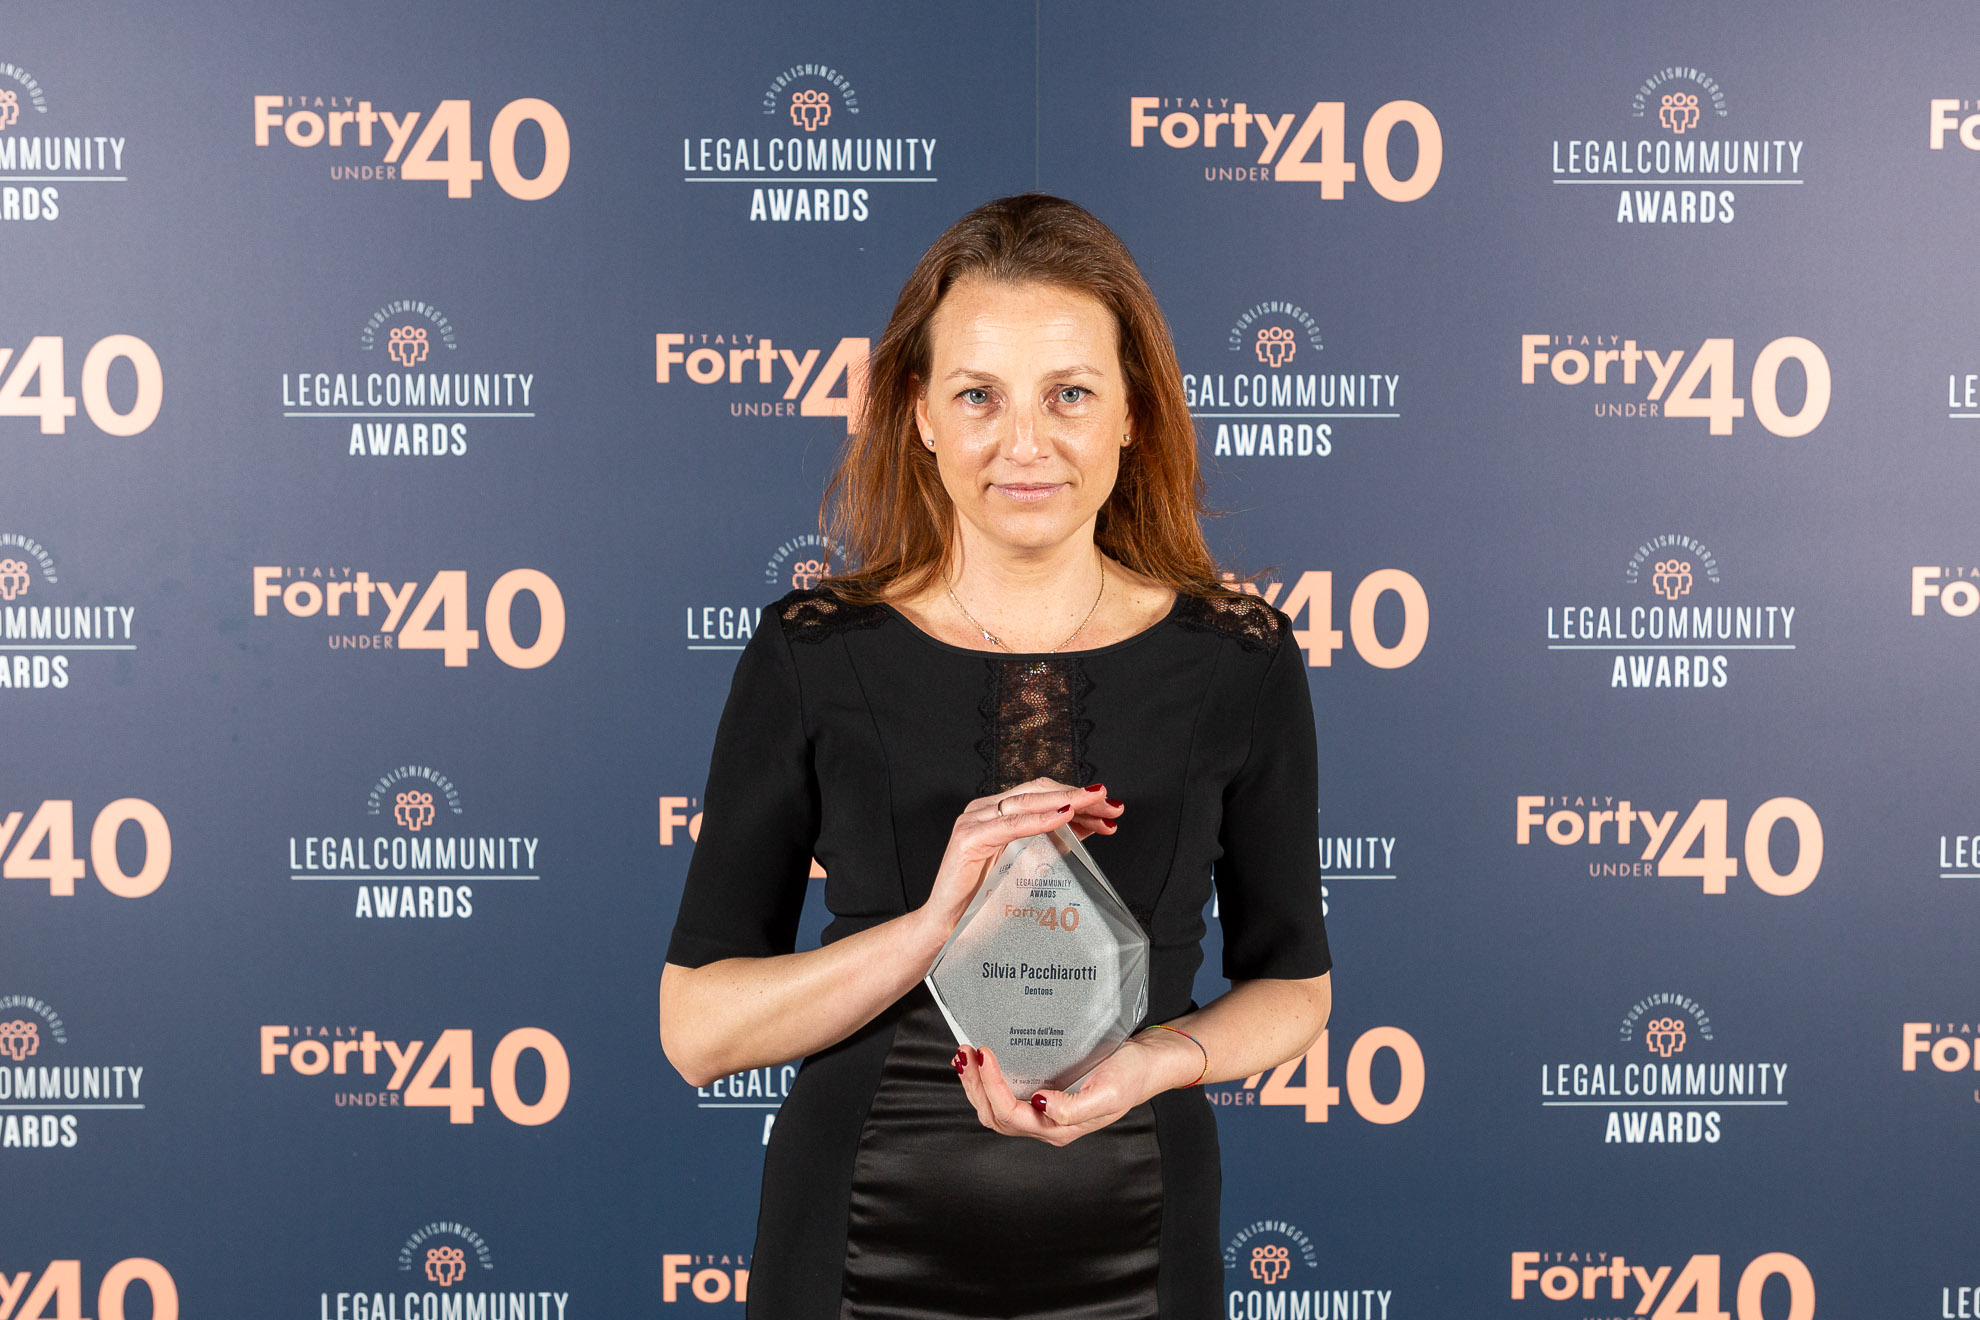 Silvia Pacchiarottii standing in front of a wall and holding an Legal Community award in her hands